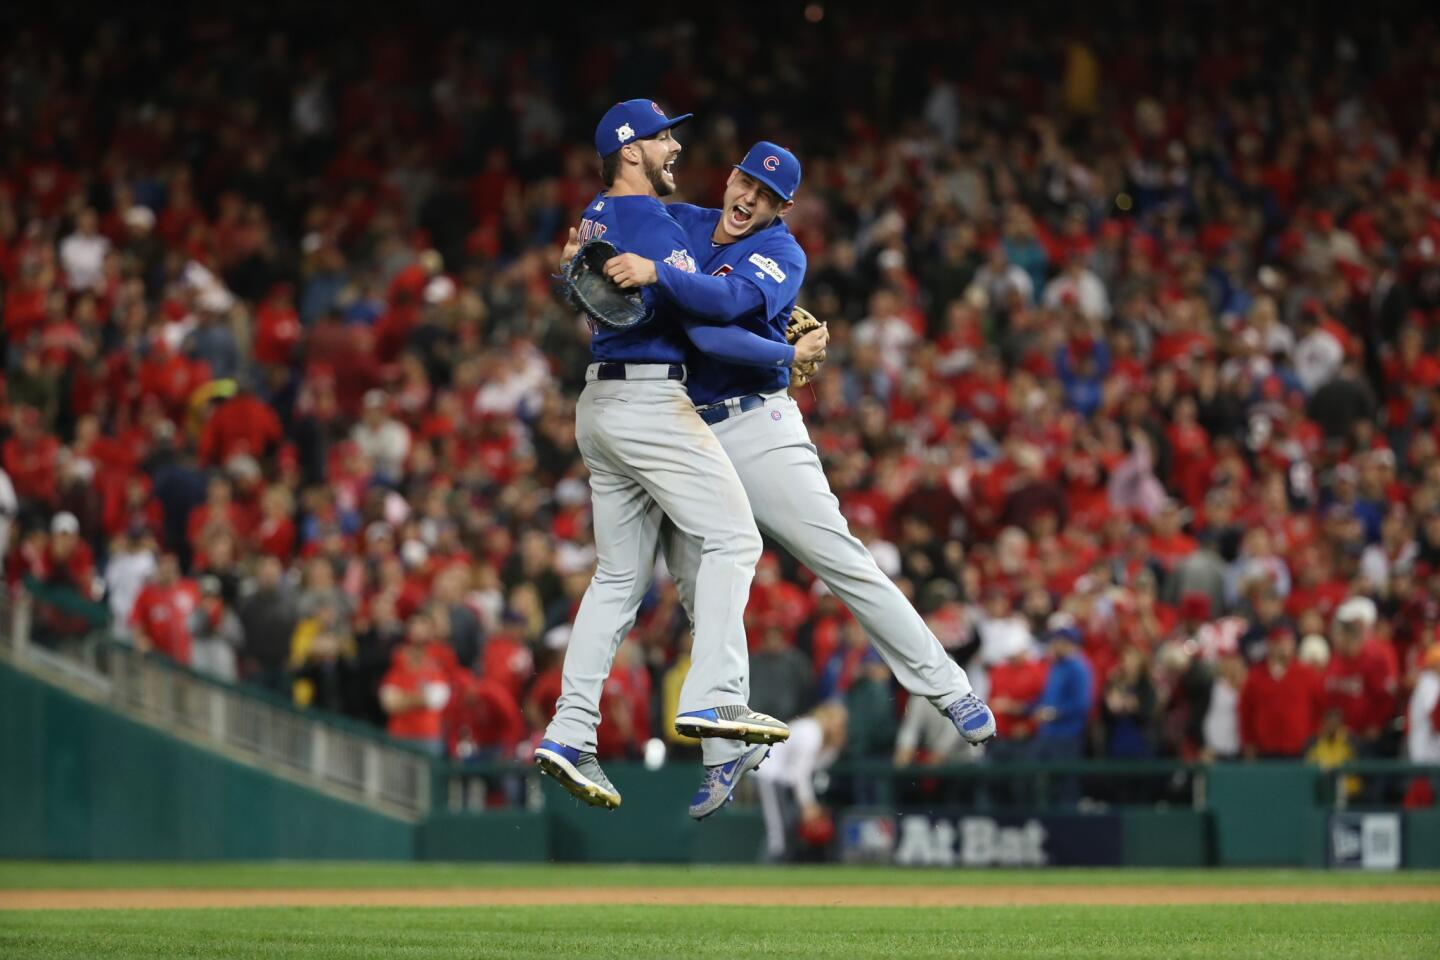 Kris Bryant and Anthony Rizzo embrace after the Cubs beat the Nationals to win Game 5 of the NLDS on Oct. 12, 2017.